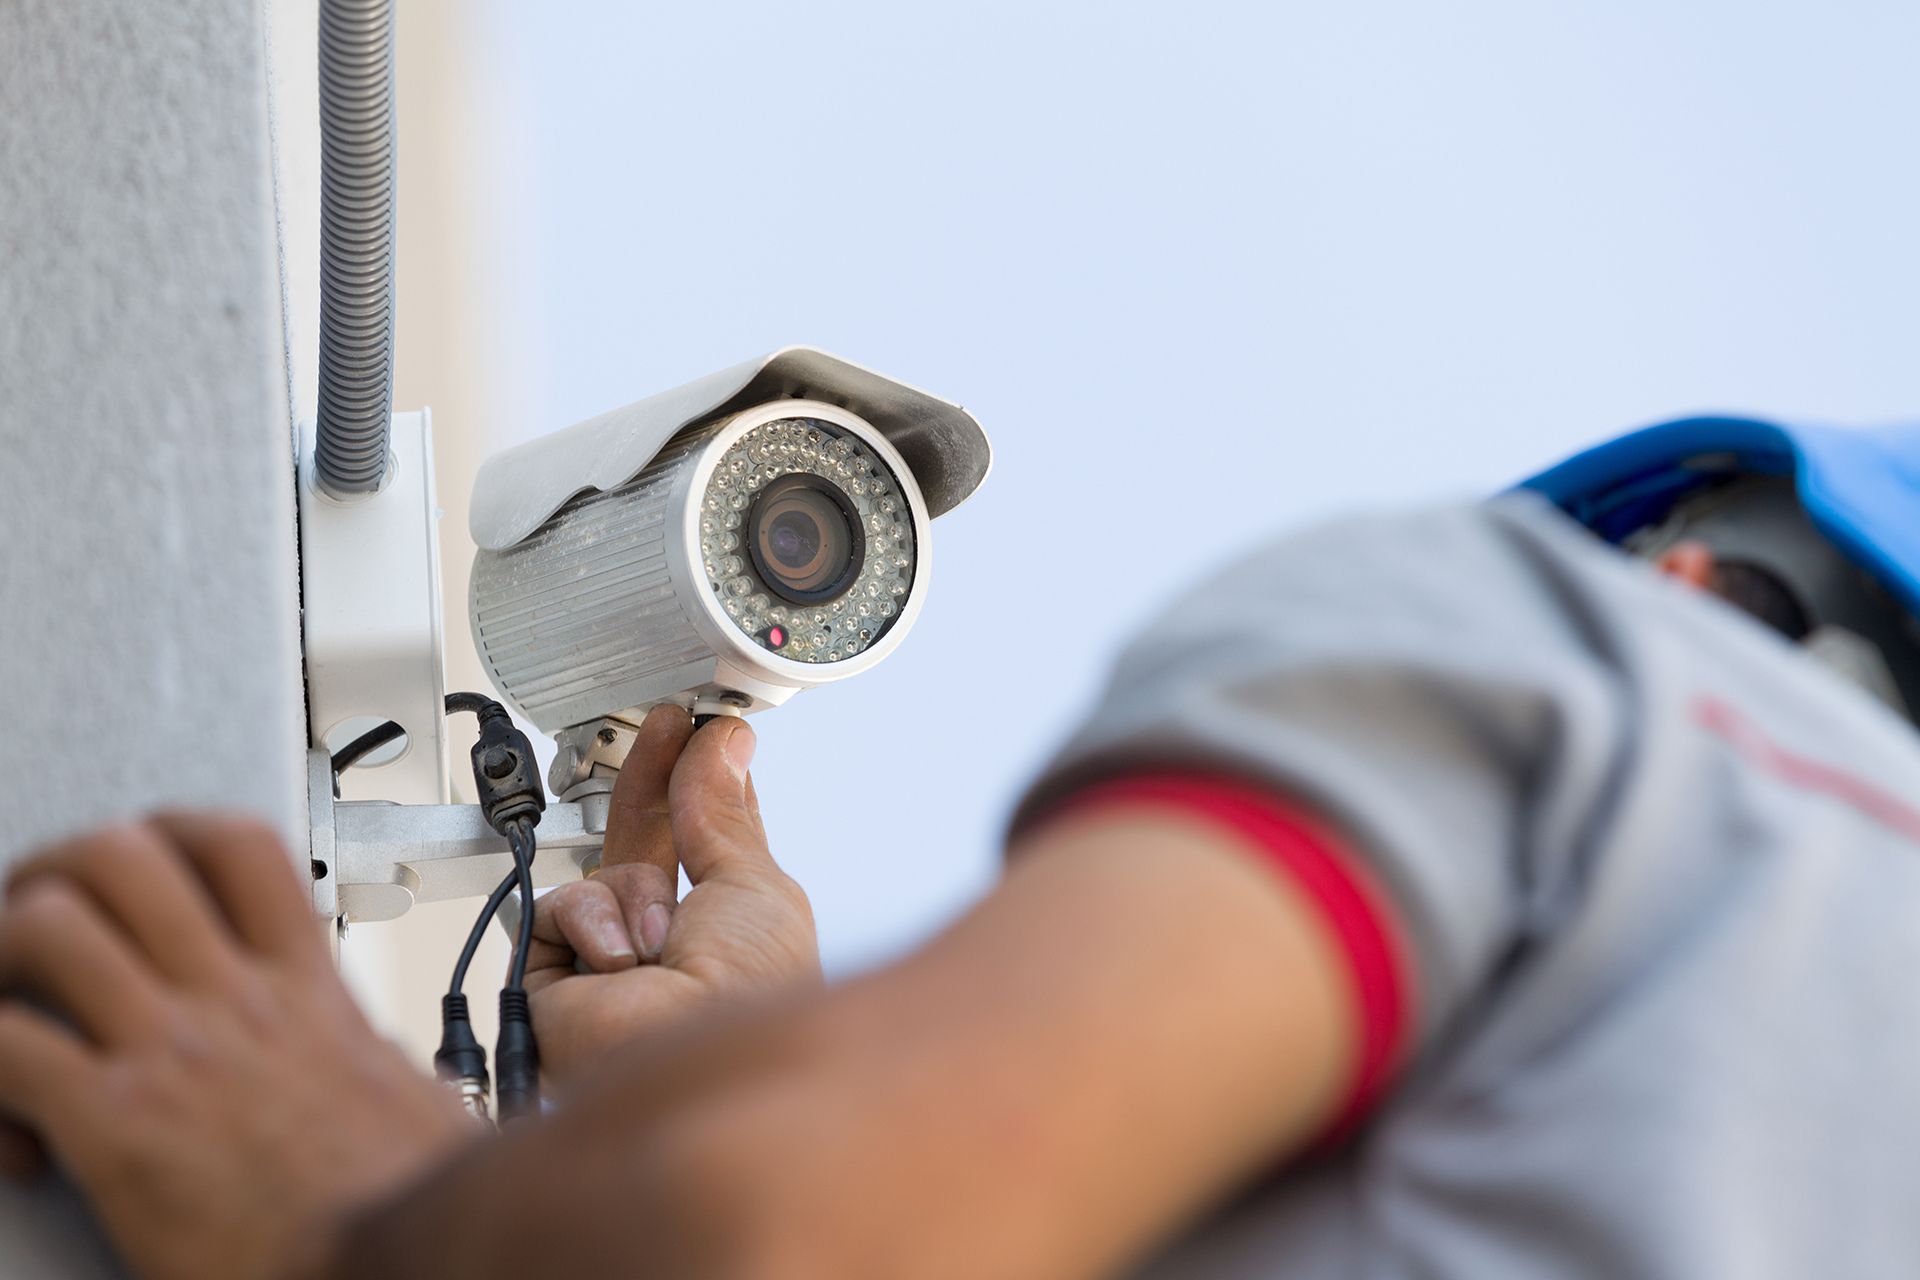 How To Connect To A Home Surveillance Camera From The Internet